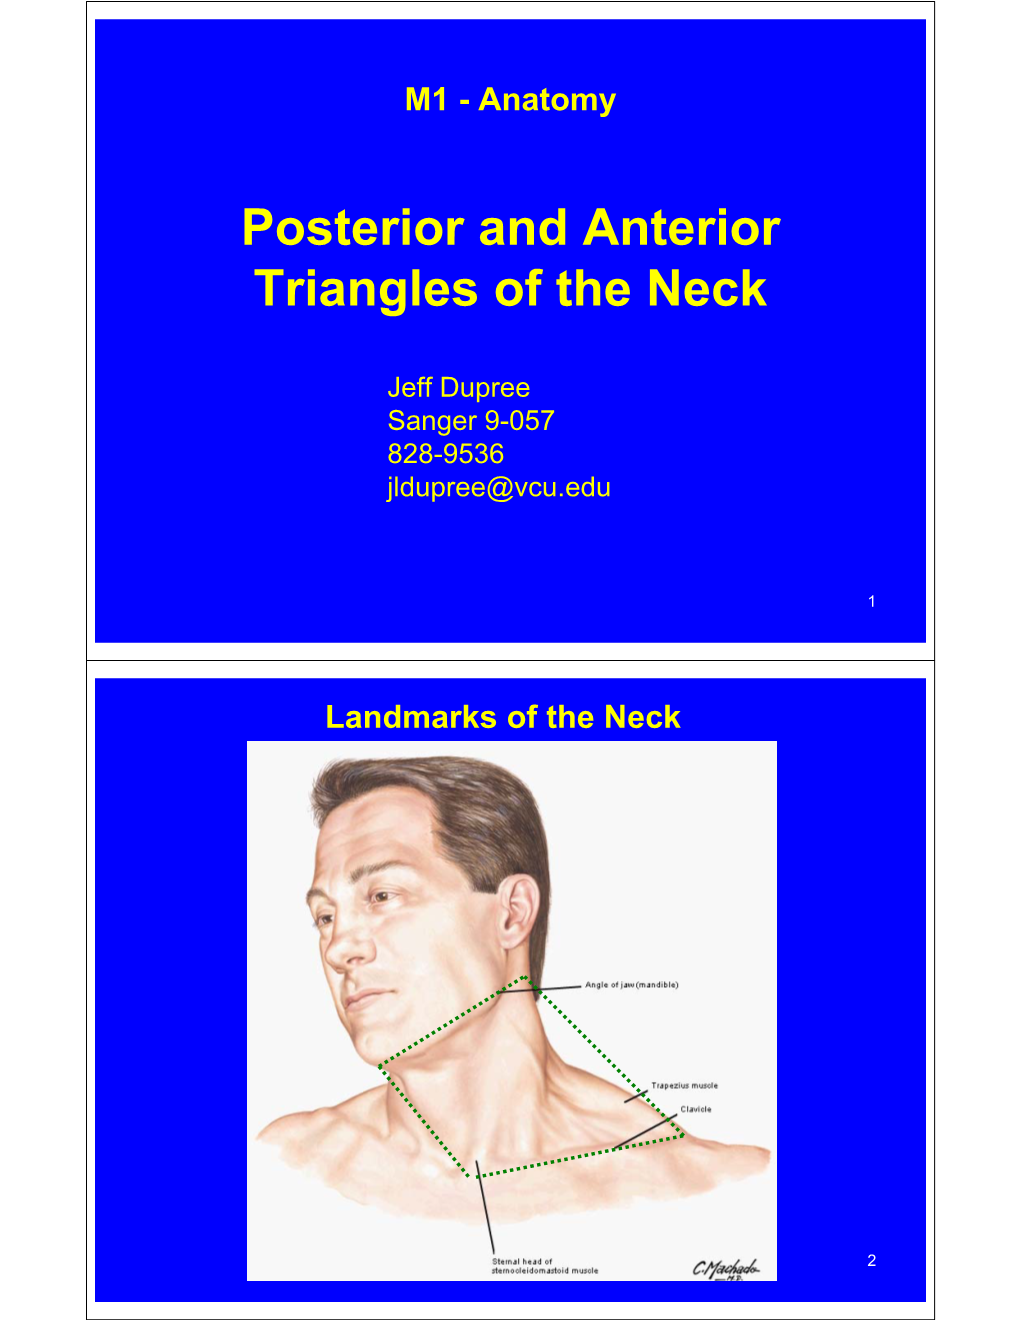 Posterior and Anterior Triangles of the Neck